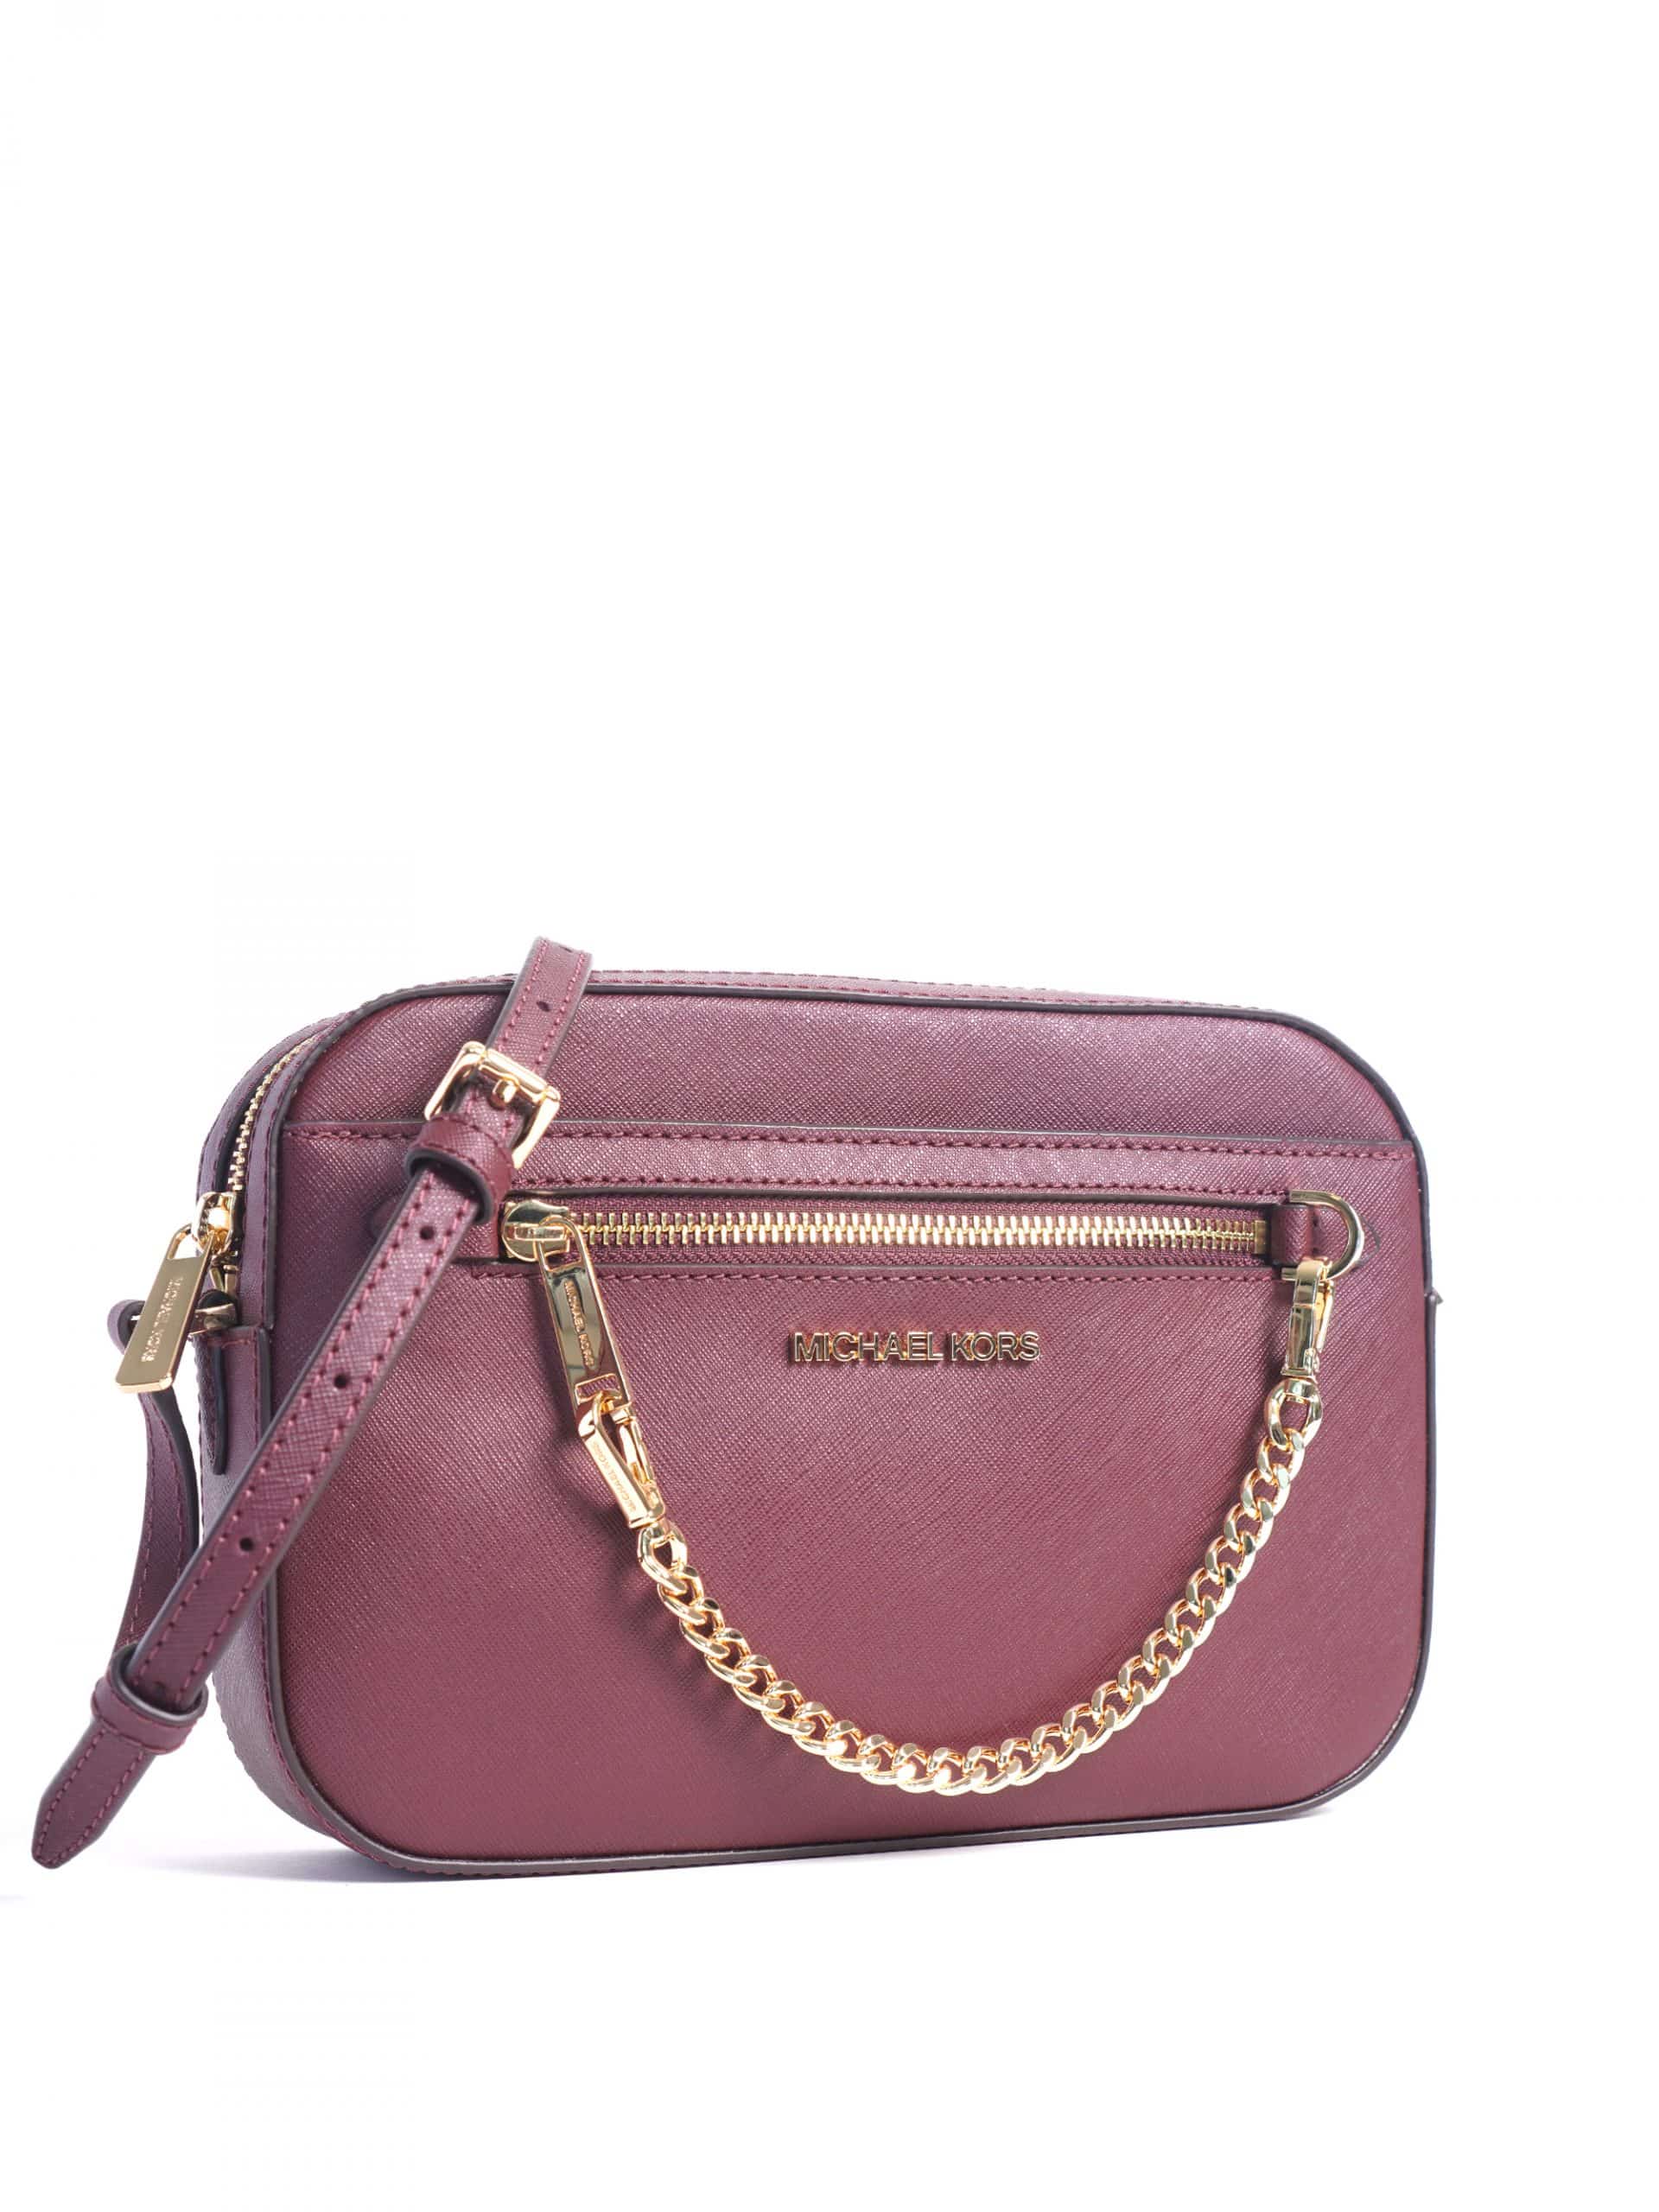 INCOMING STOCK Michael Kors Jet Set Item Large EW Zip Chain Crossbody in  Merlot (35S1GTTC7L) RM530 This crossbody bag is crafted of saffiano  leather. A, By USA Loveshoppe